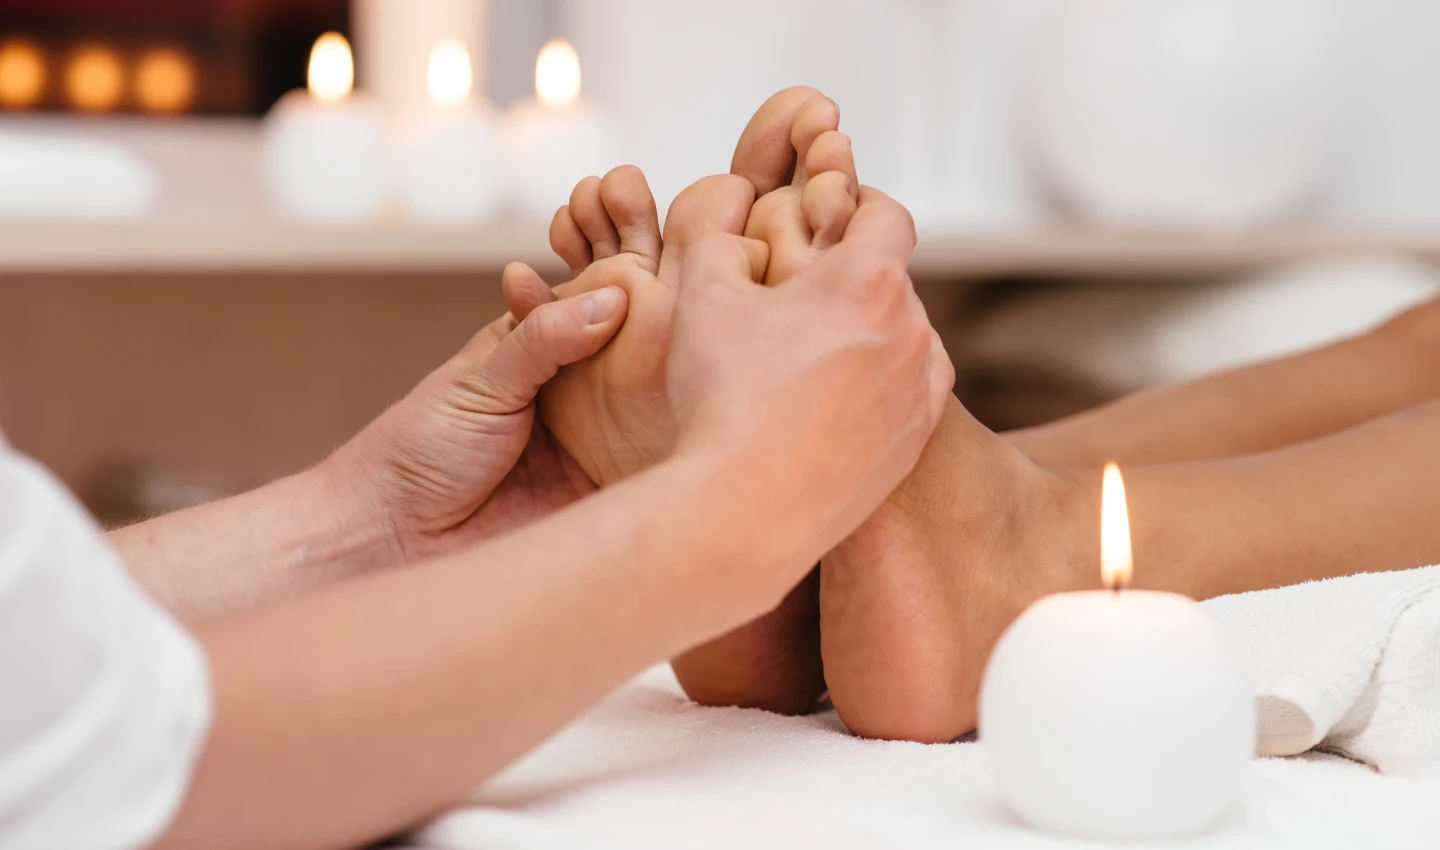 : Image of a person receiving a foot massage as part of reflexology wellness therapy.